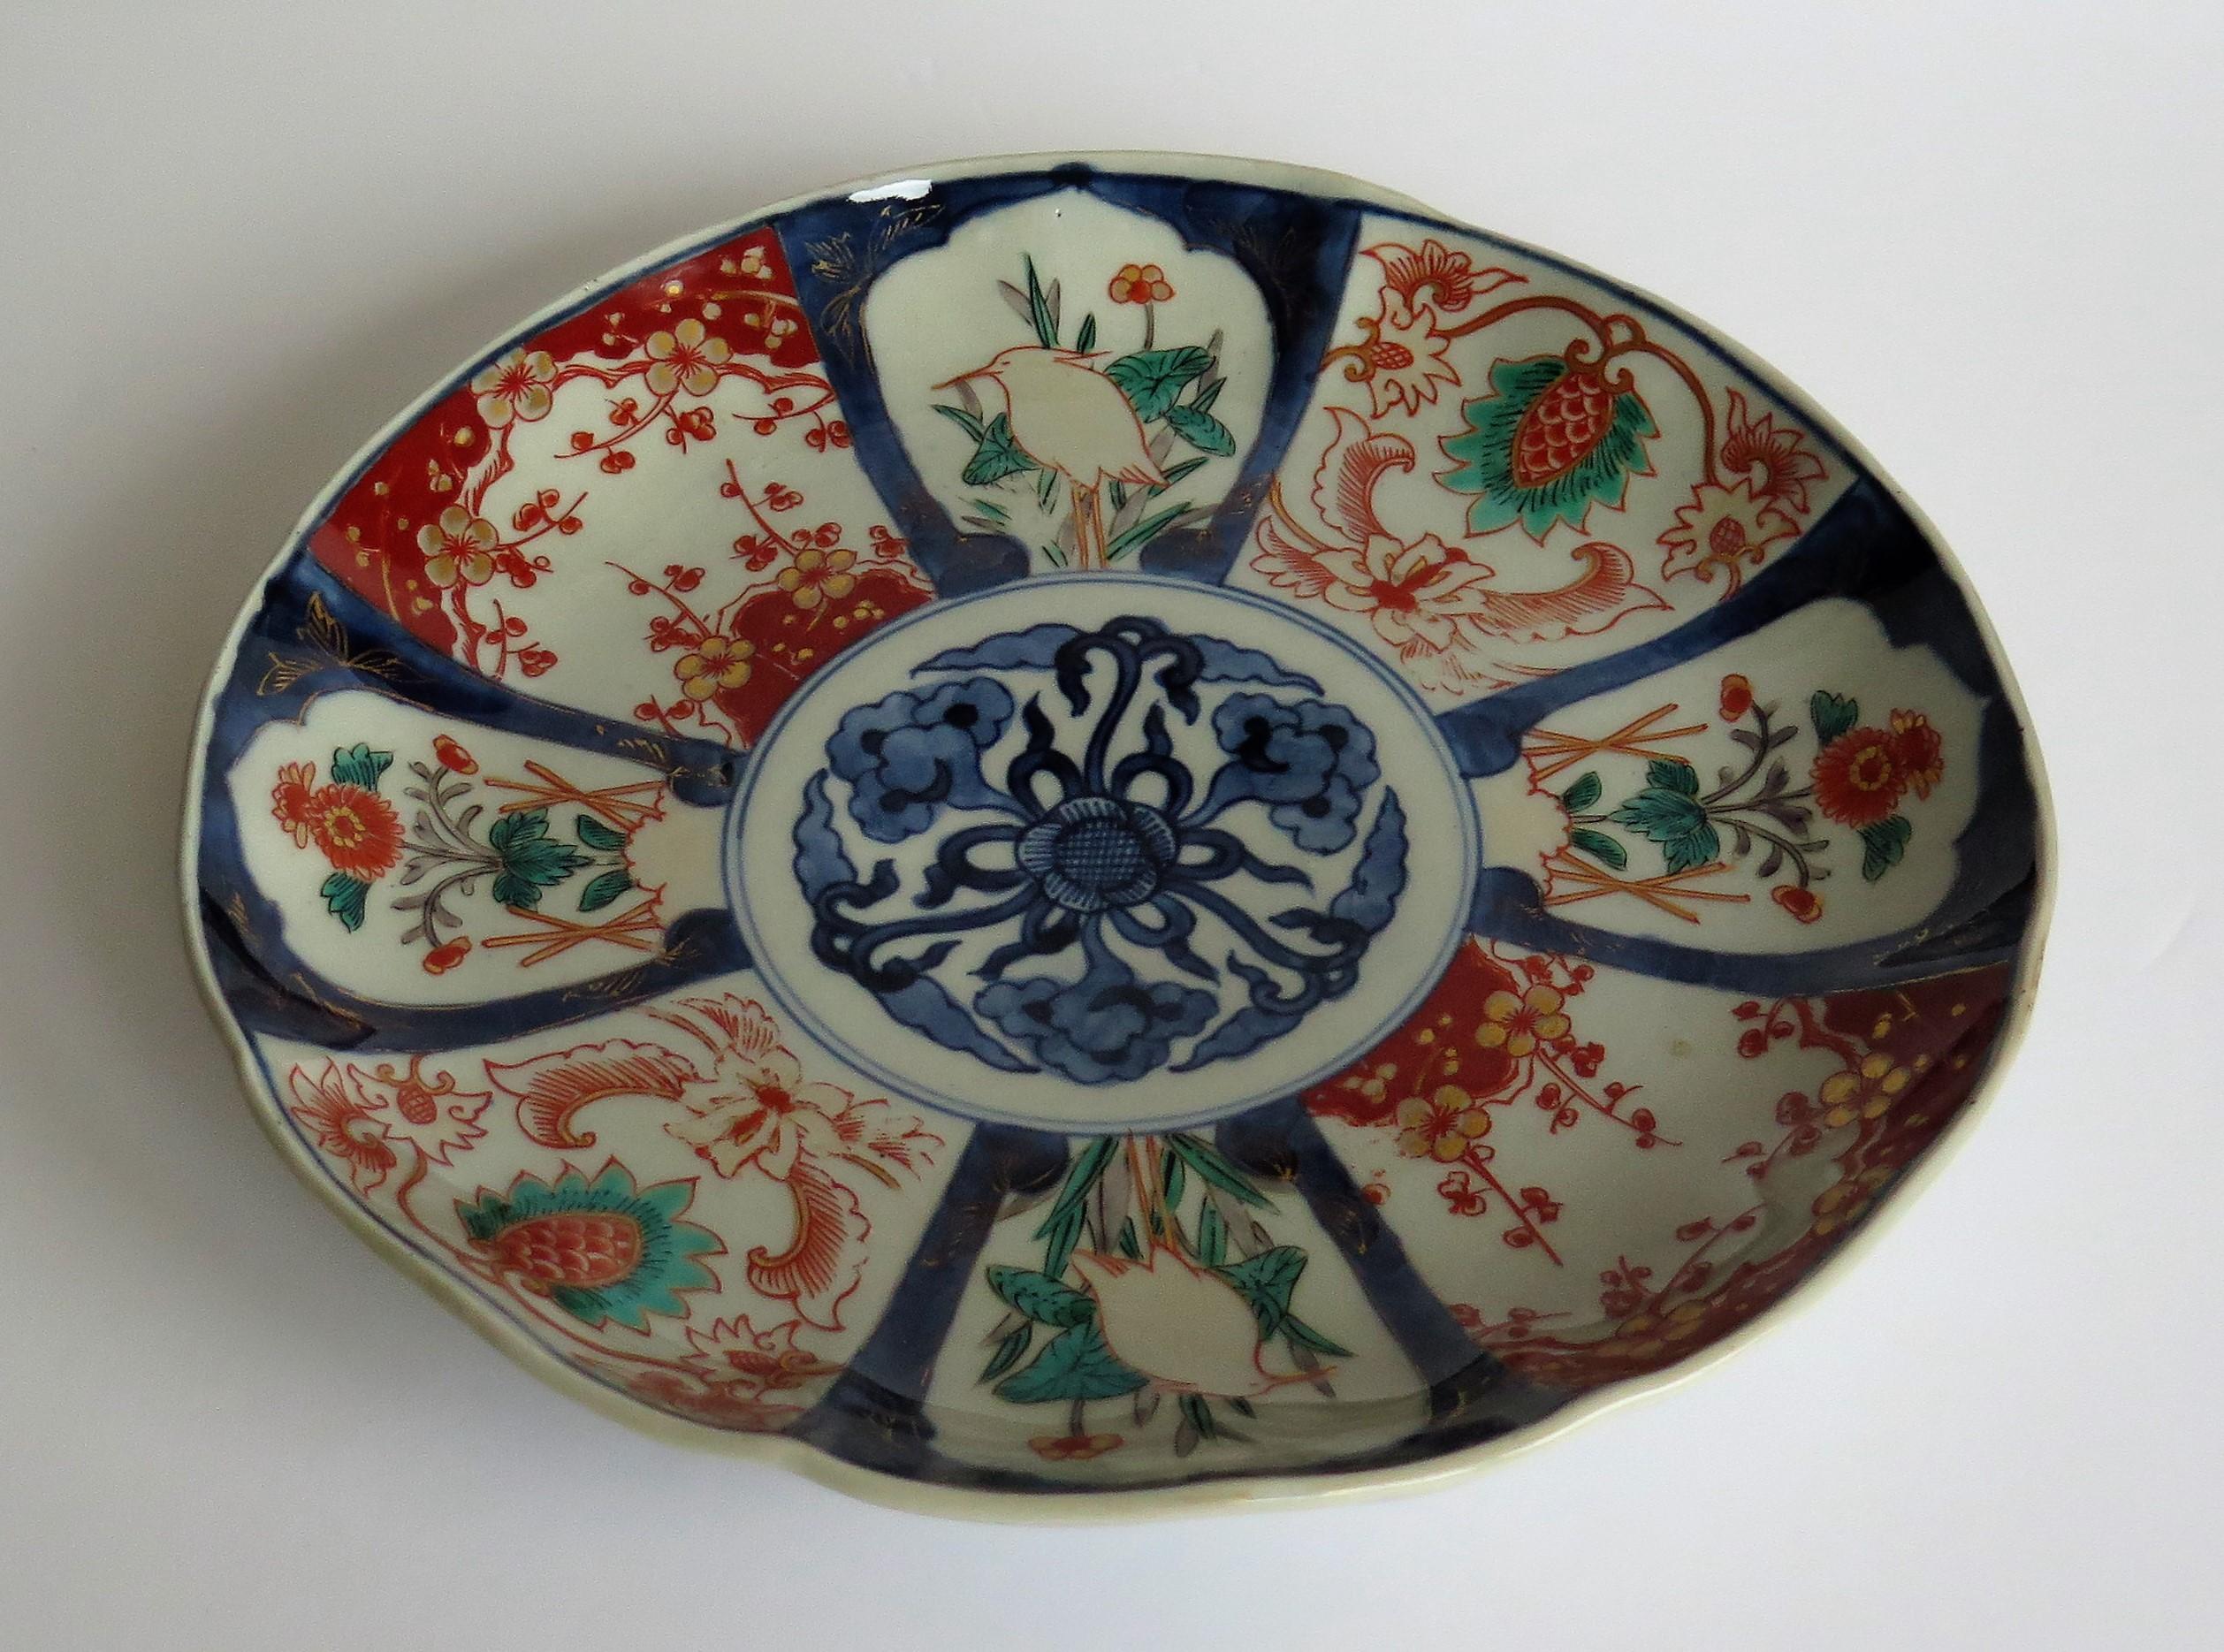 Japanese Porcelain Large Plate or Hand Painted Imari, 19th Century Meiji Period  3